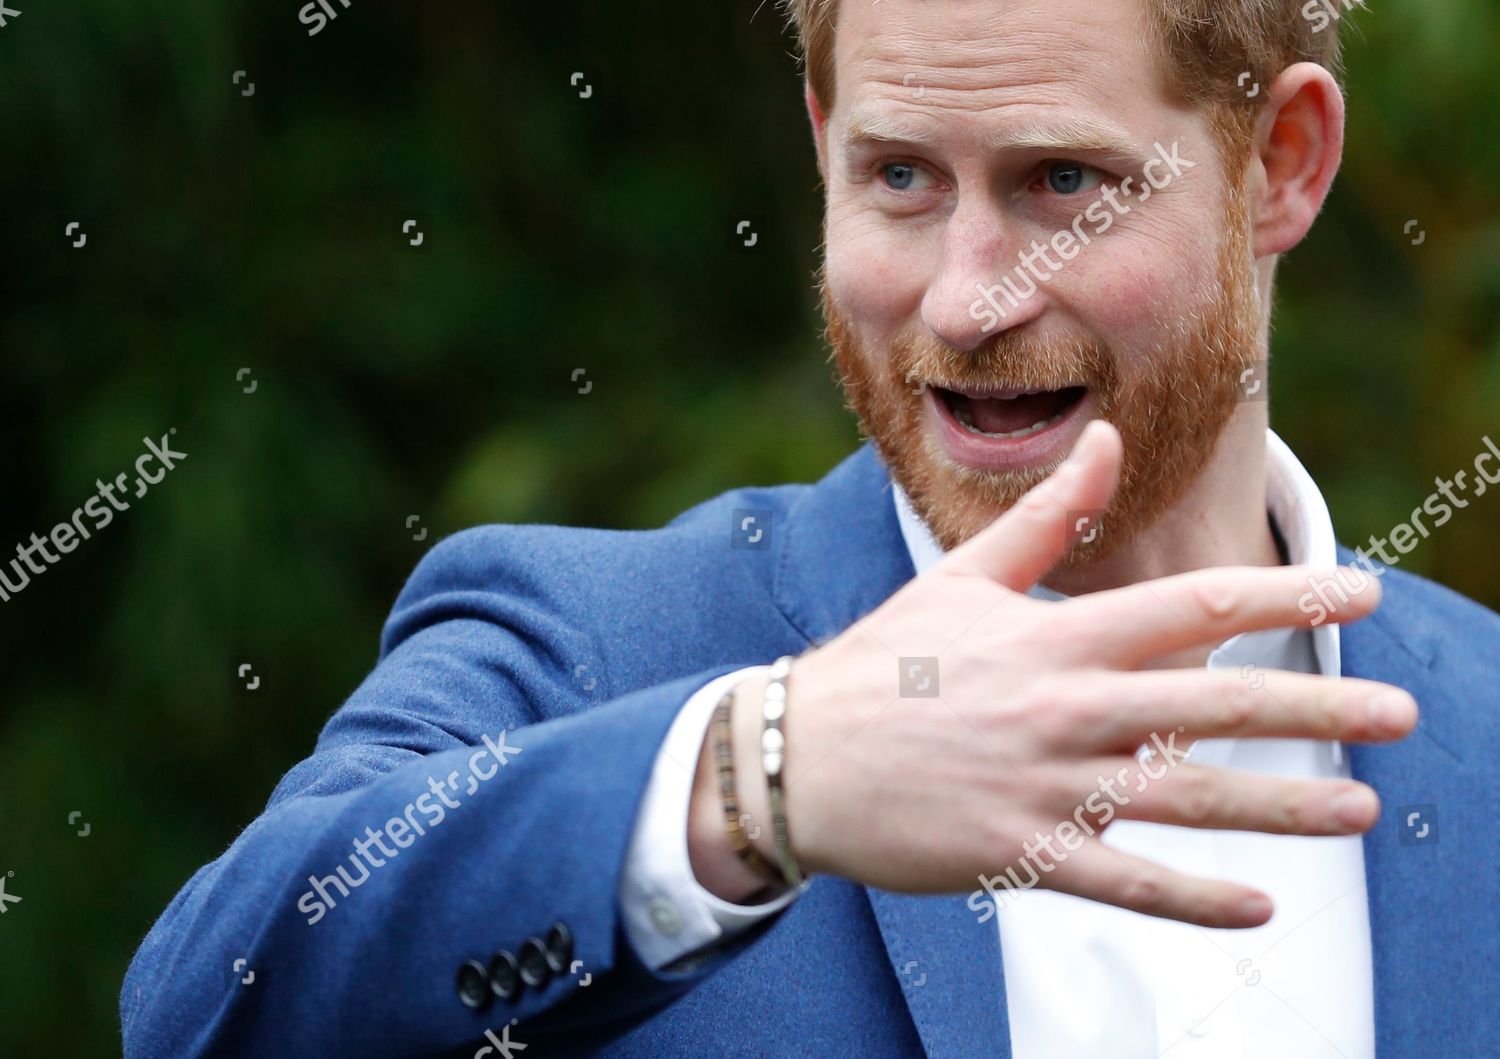 prince-harry-visits-st-vincents-catholic-primary-school-for-commonwealth-canopy-and-woodland-trust-tree-planting-ceremony-london-uk-shutterstock-editorial-10161063a.jpg